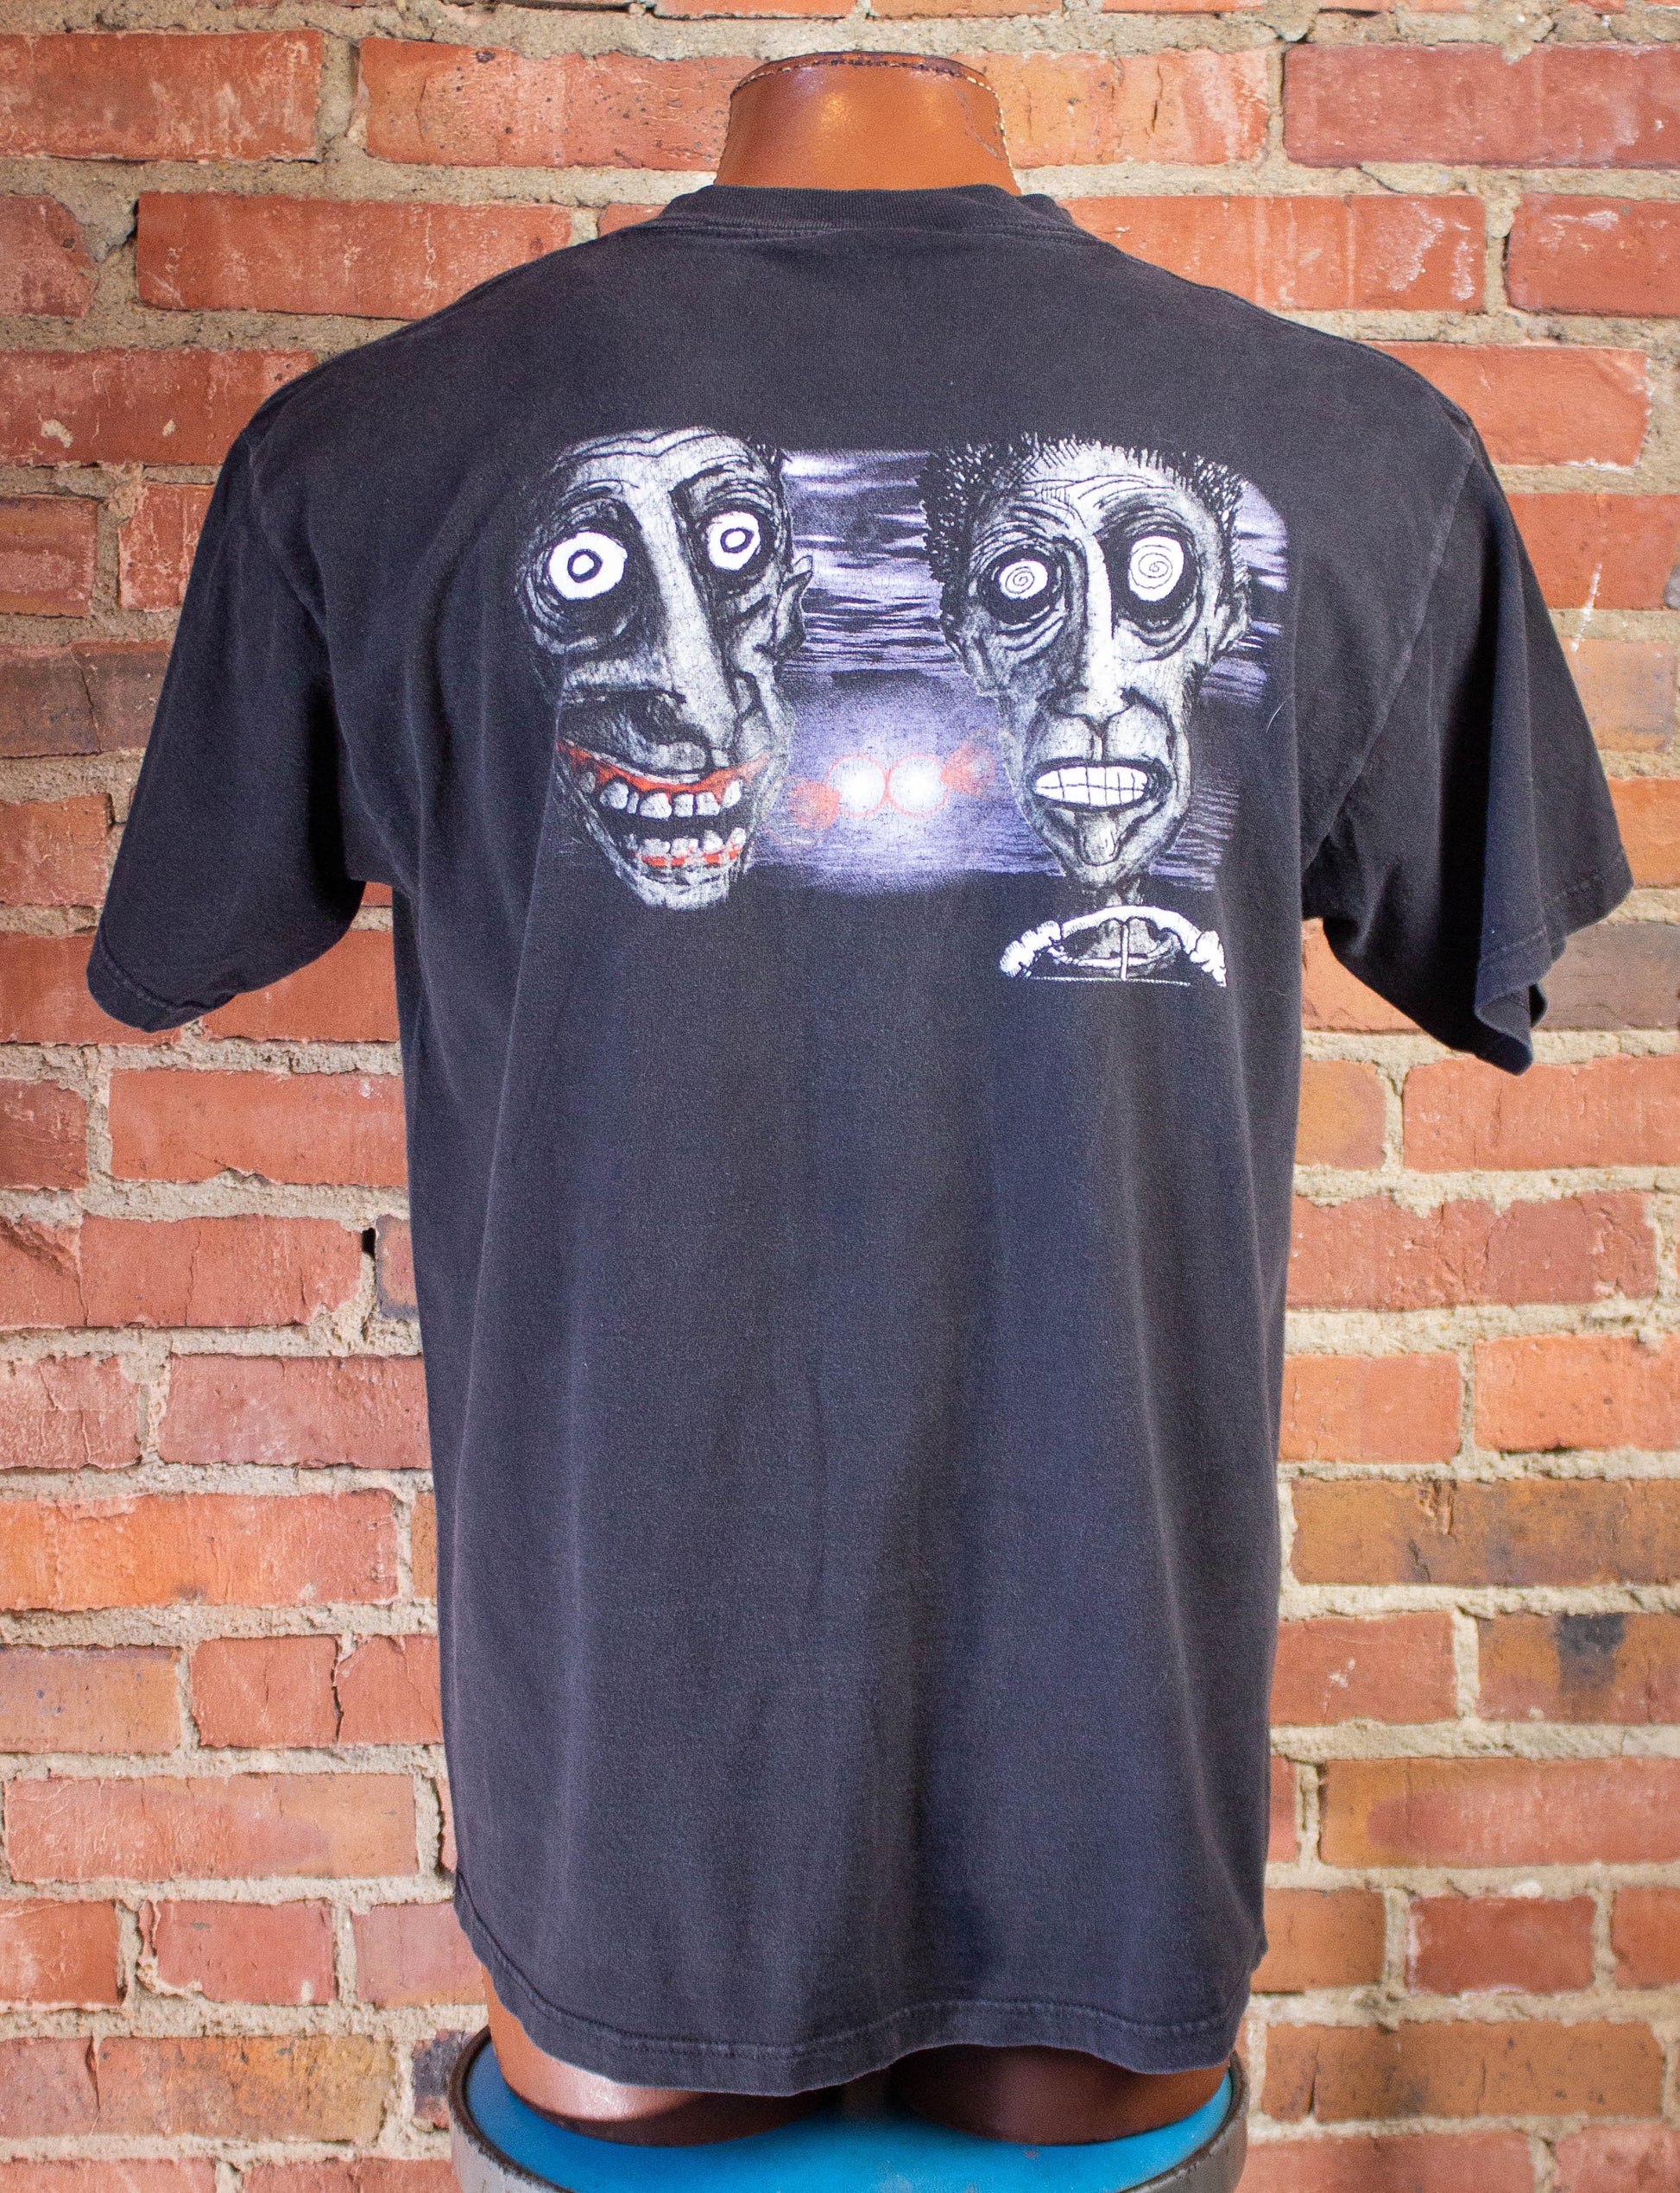 Vintage Primus Tales From The Punchbowl Tour Concert T-Shirt 1995 XL